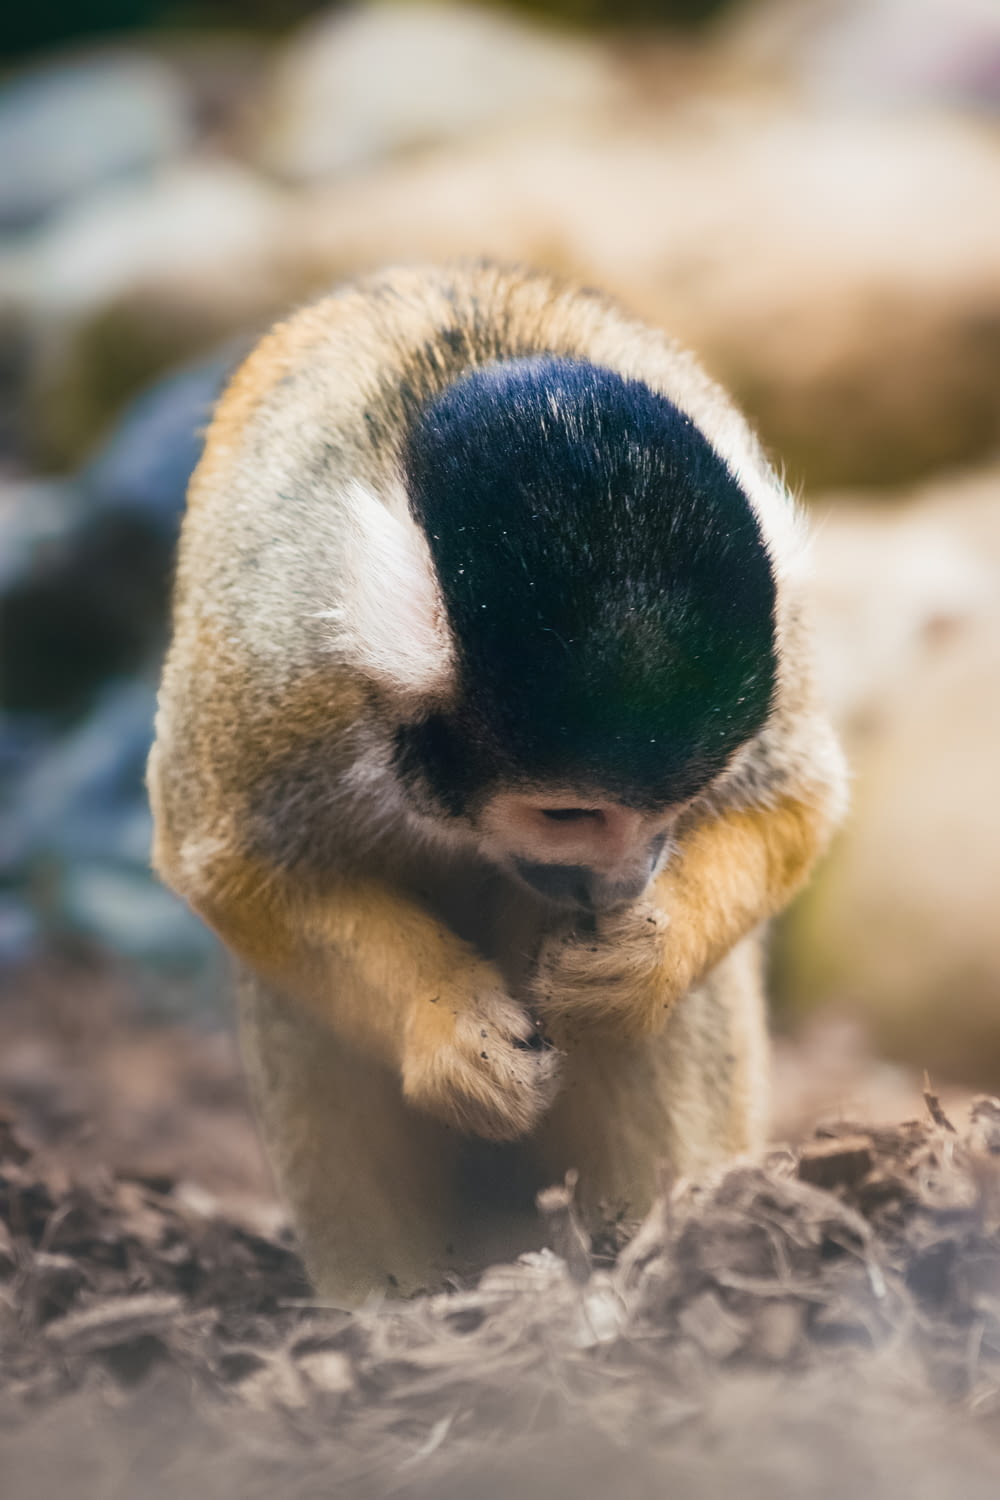 a small monkey is walking through the dirt